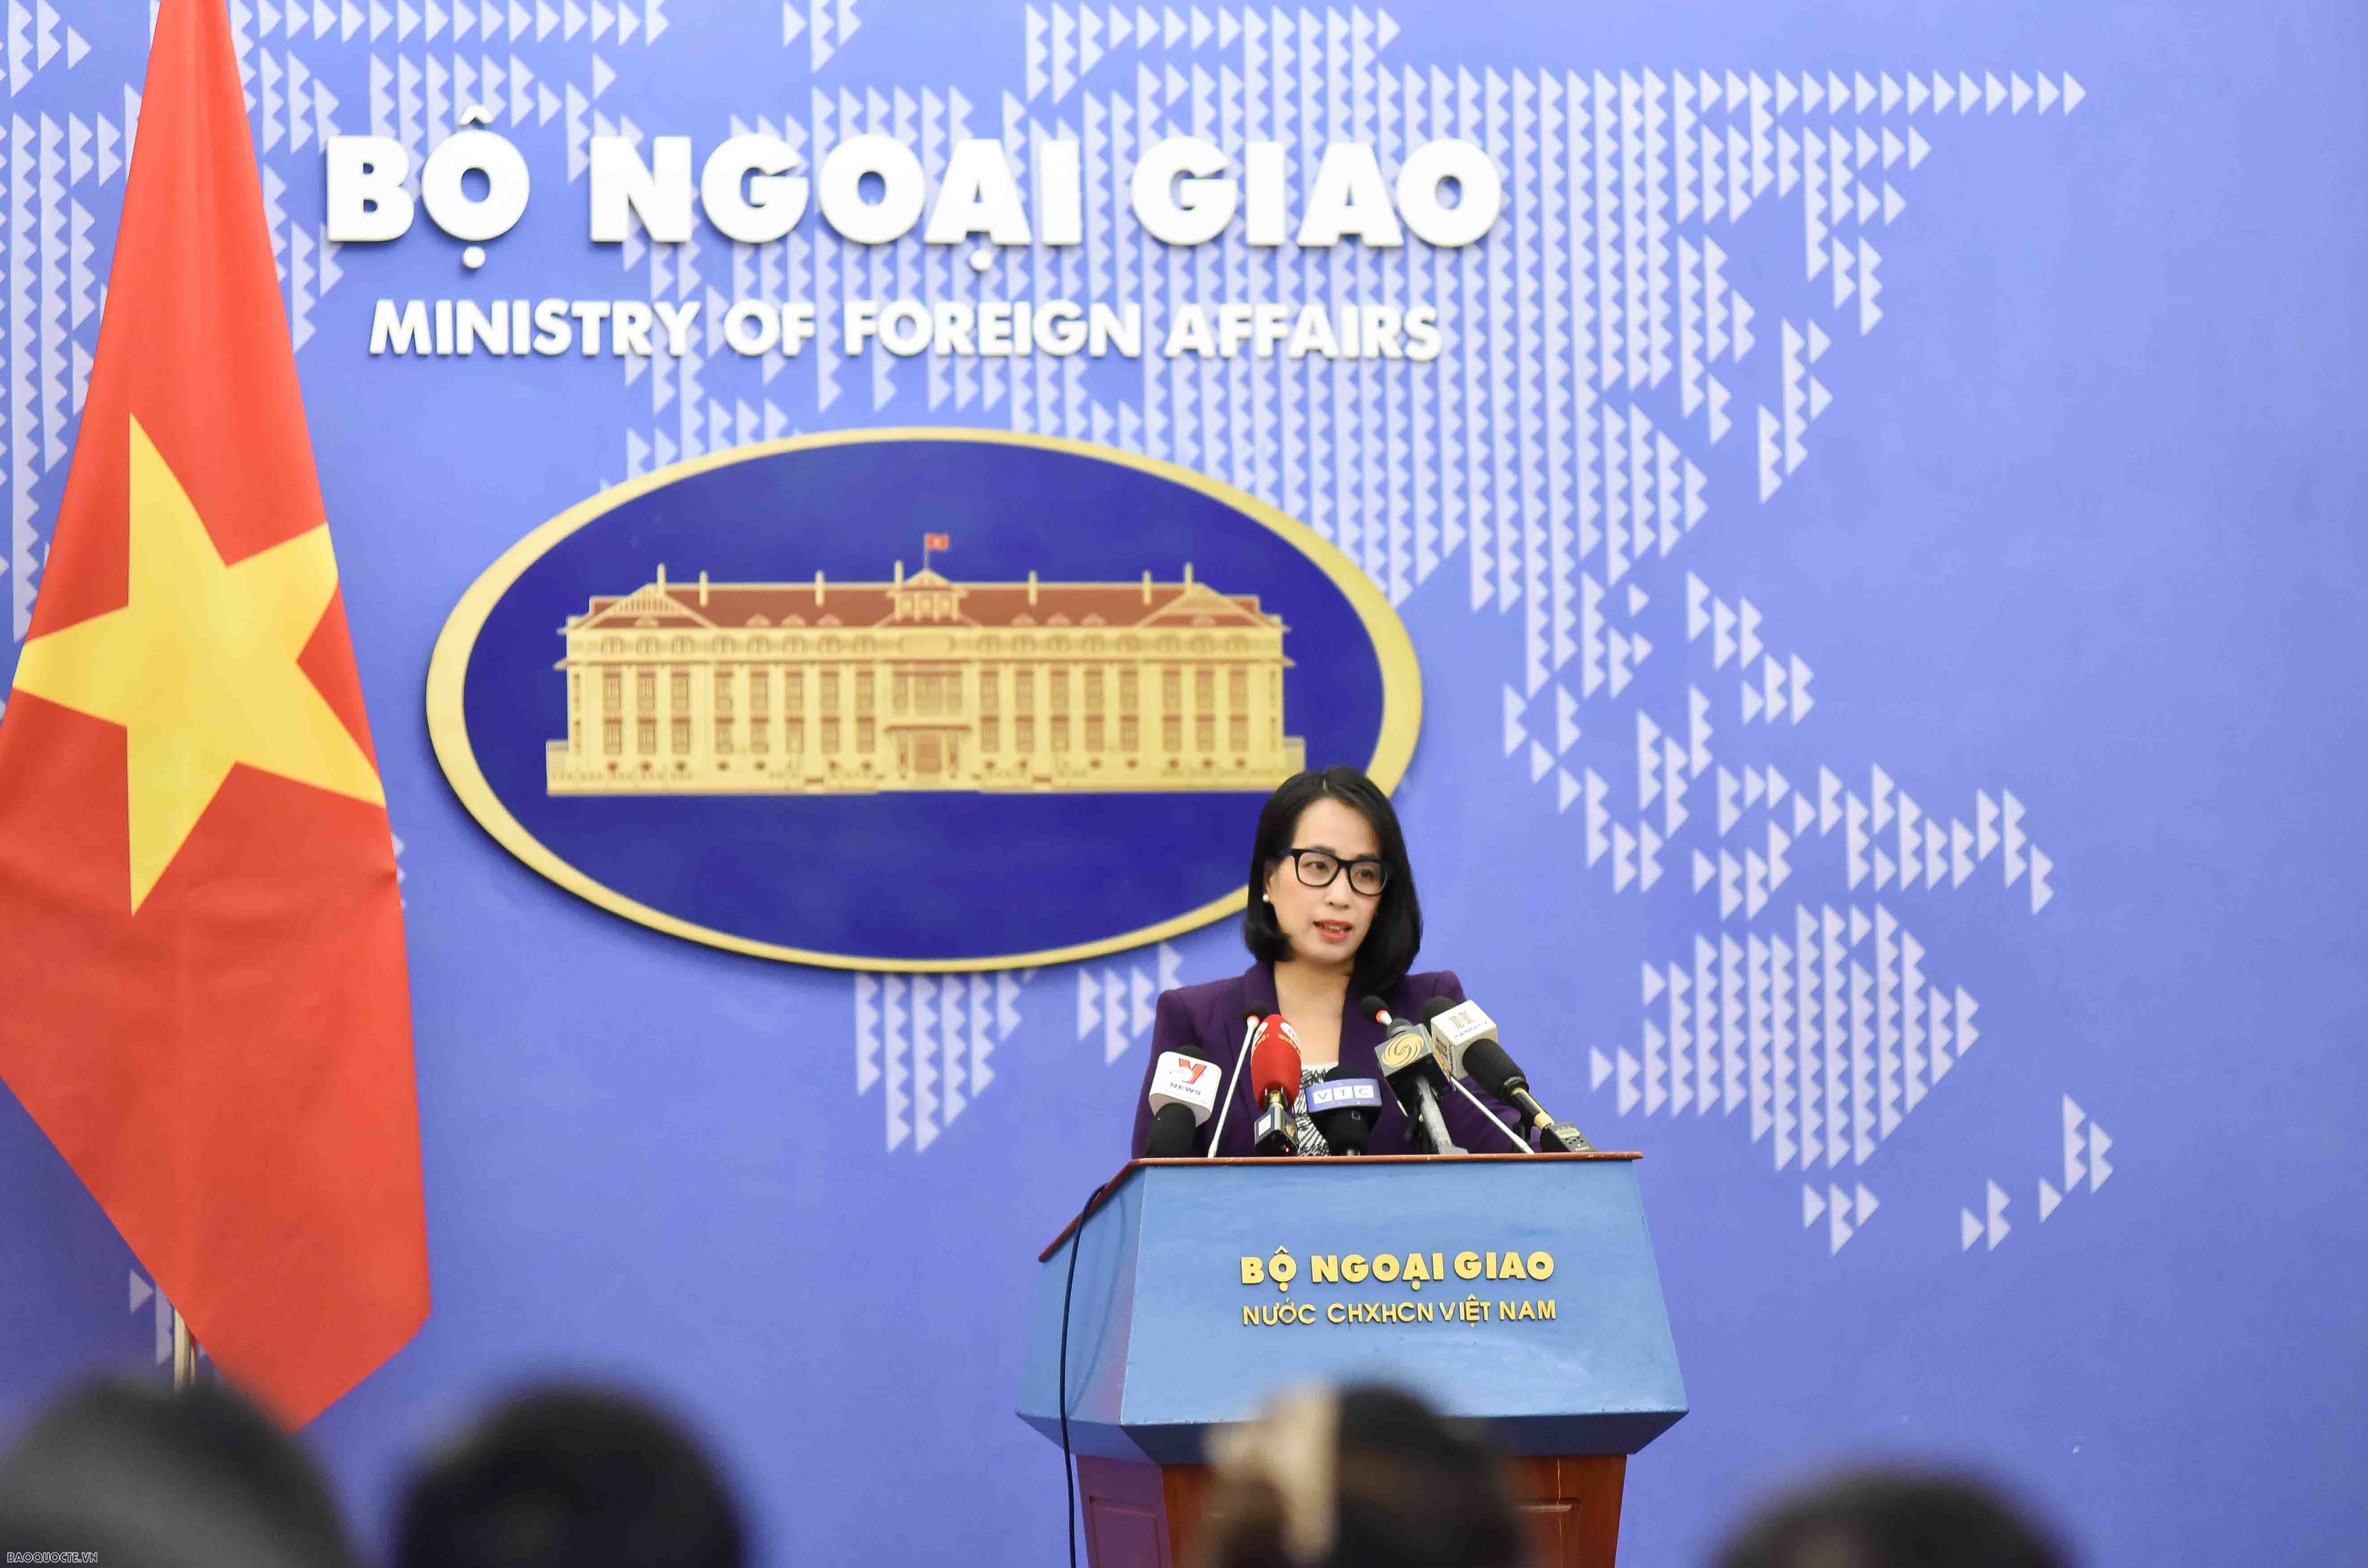 Vietnam persistently follows “One China” policy: Spokesperson